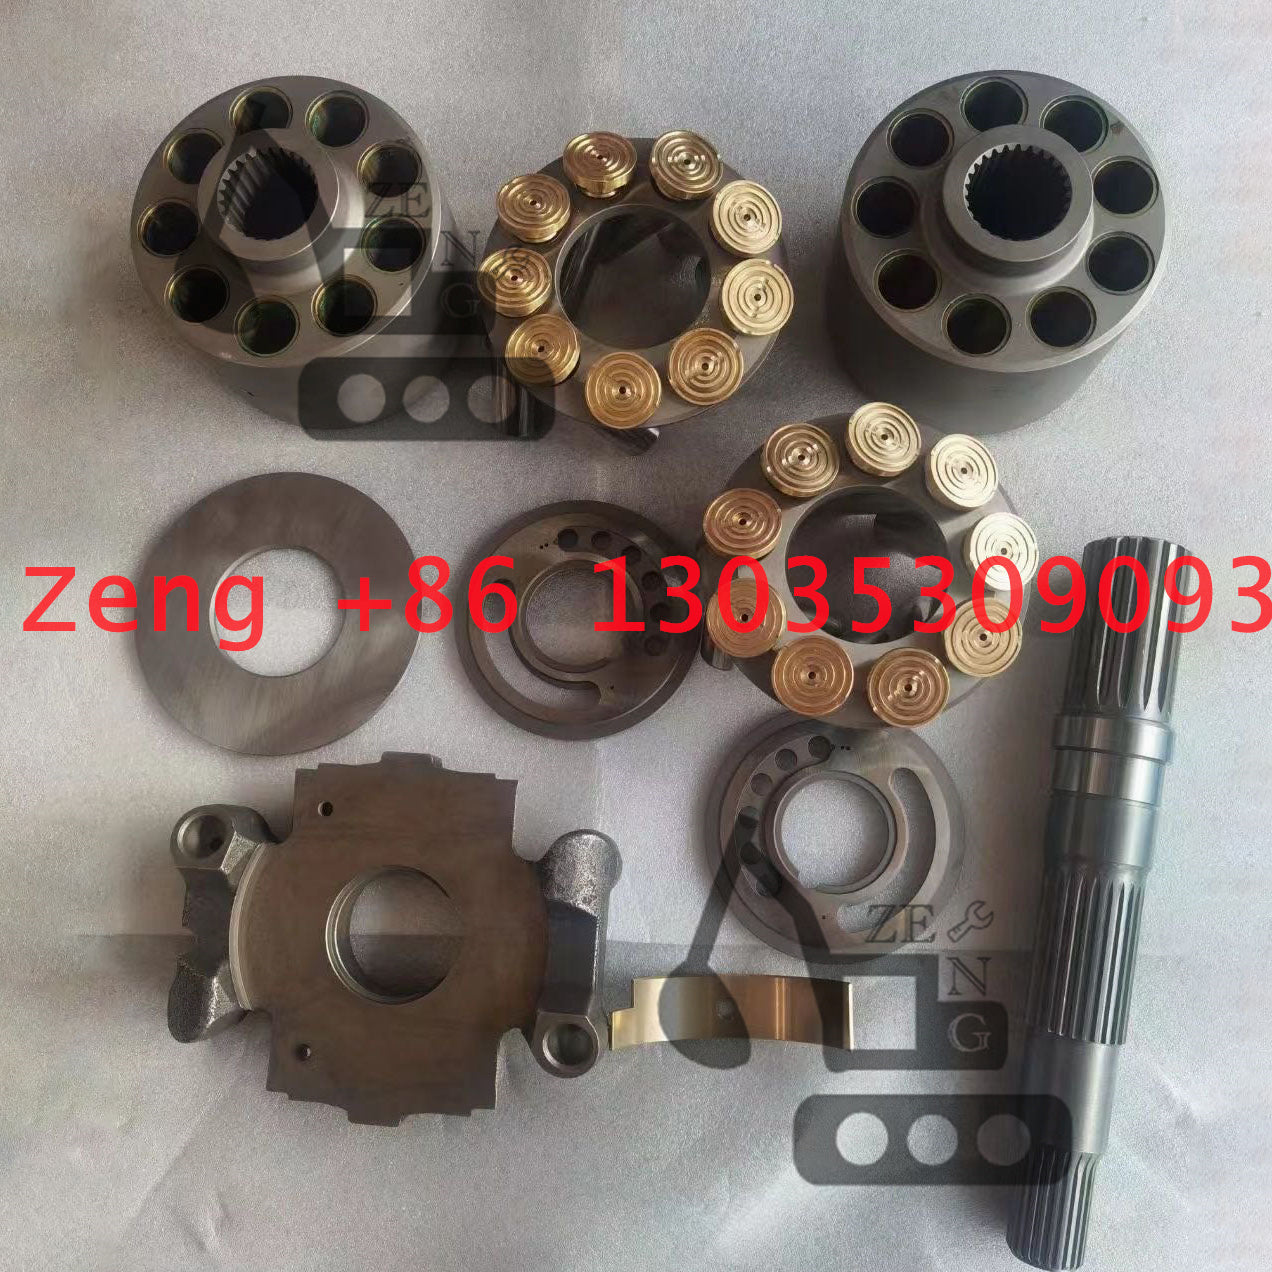 V90N130 and A28VO130 main hydraulic pump parts used for New caterpillar CAT320GC excavator